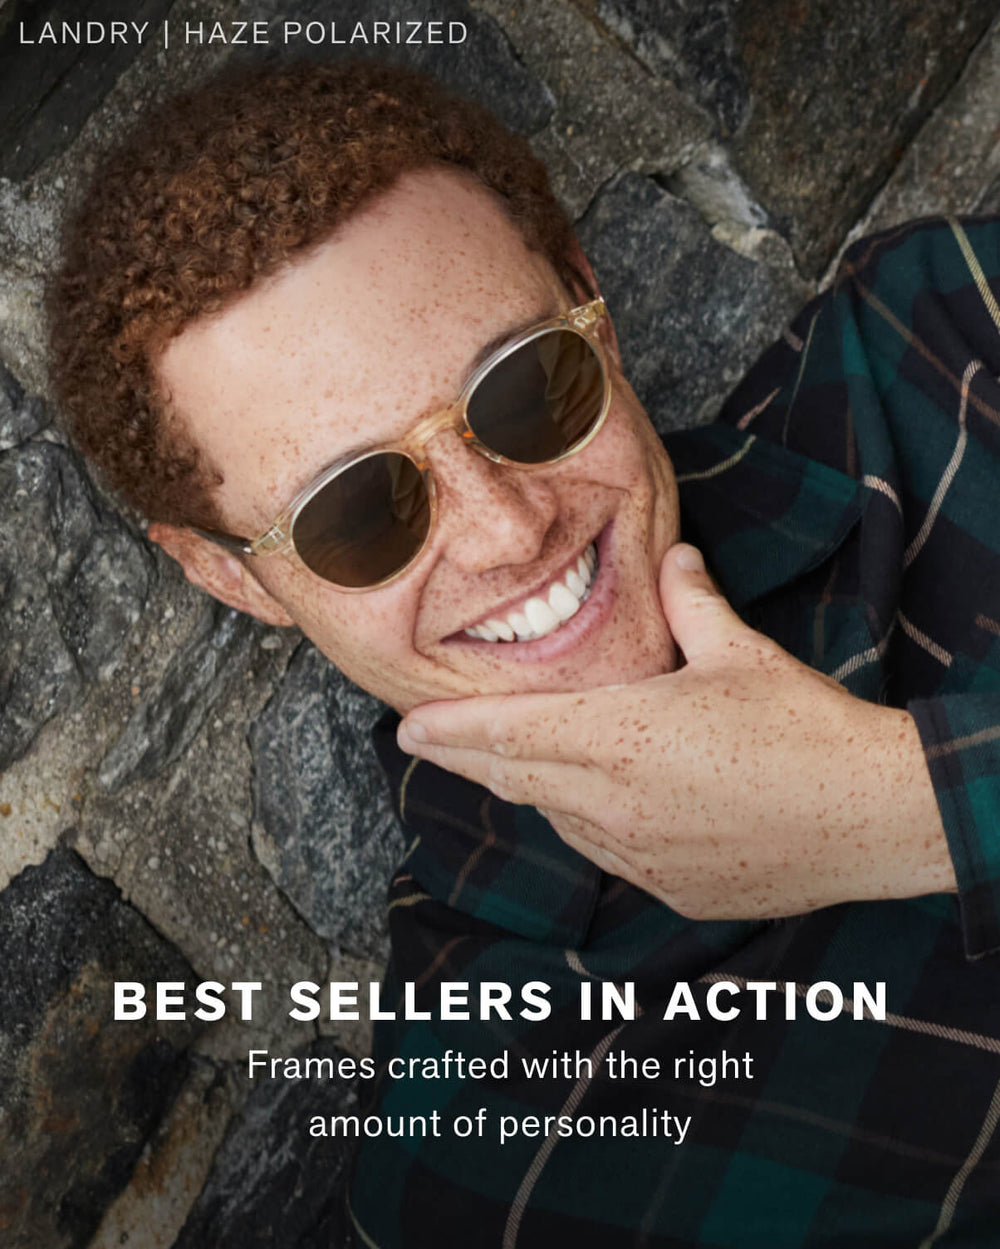 Best Sellers in Action. Frames crafted with the right amount of personality